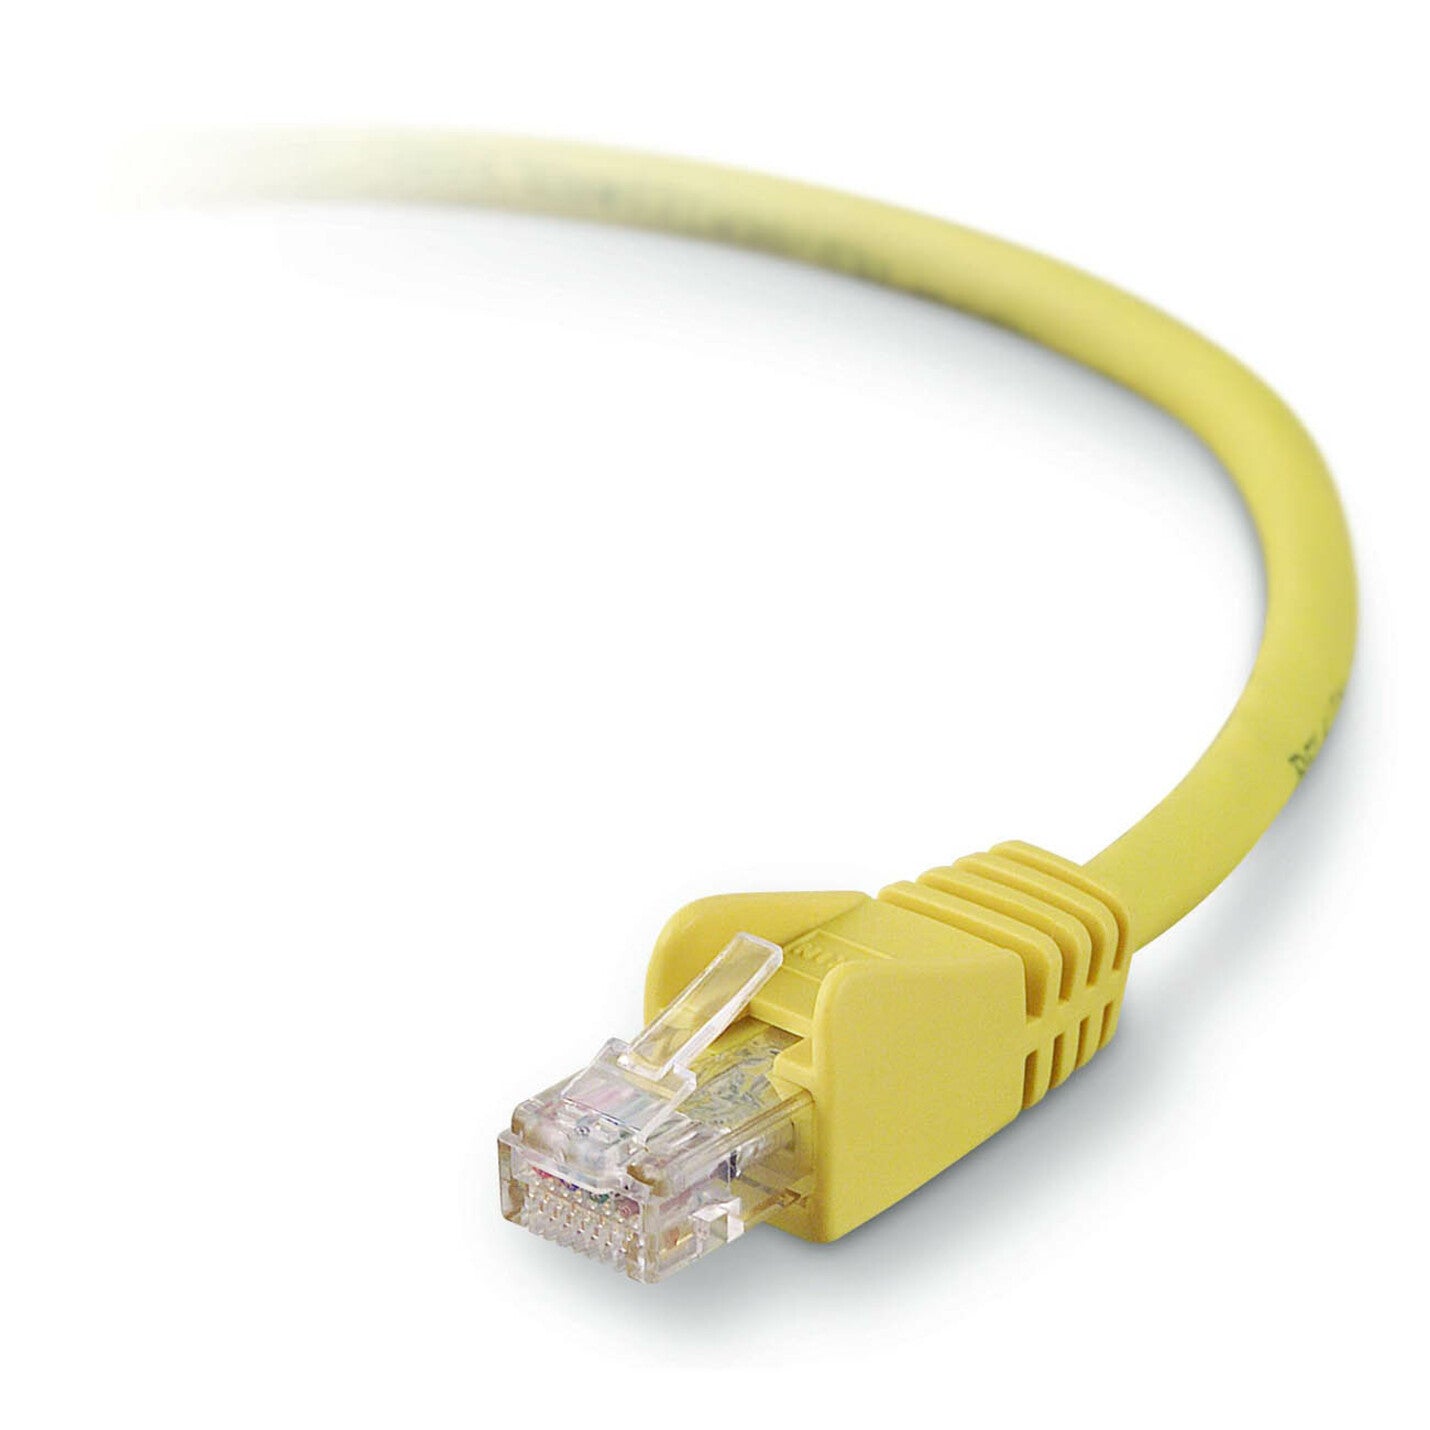 Belkin A3L980-05-YLW RJ45 Category 6 Patch Cable, 4.92 ft, Copper Conductor, Yellow